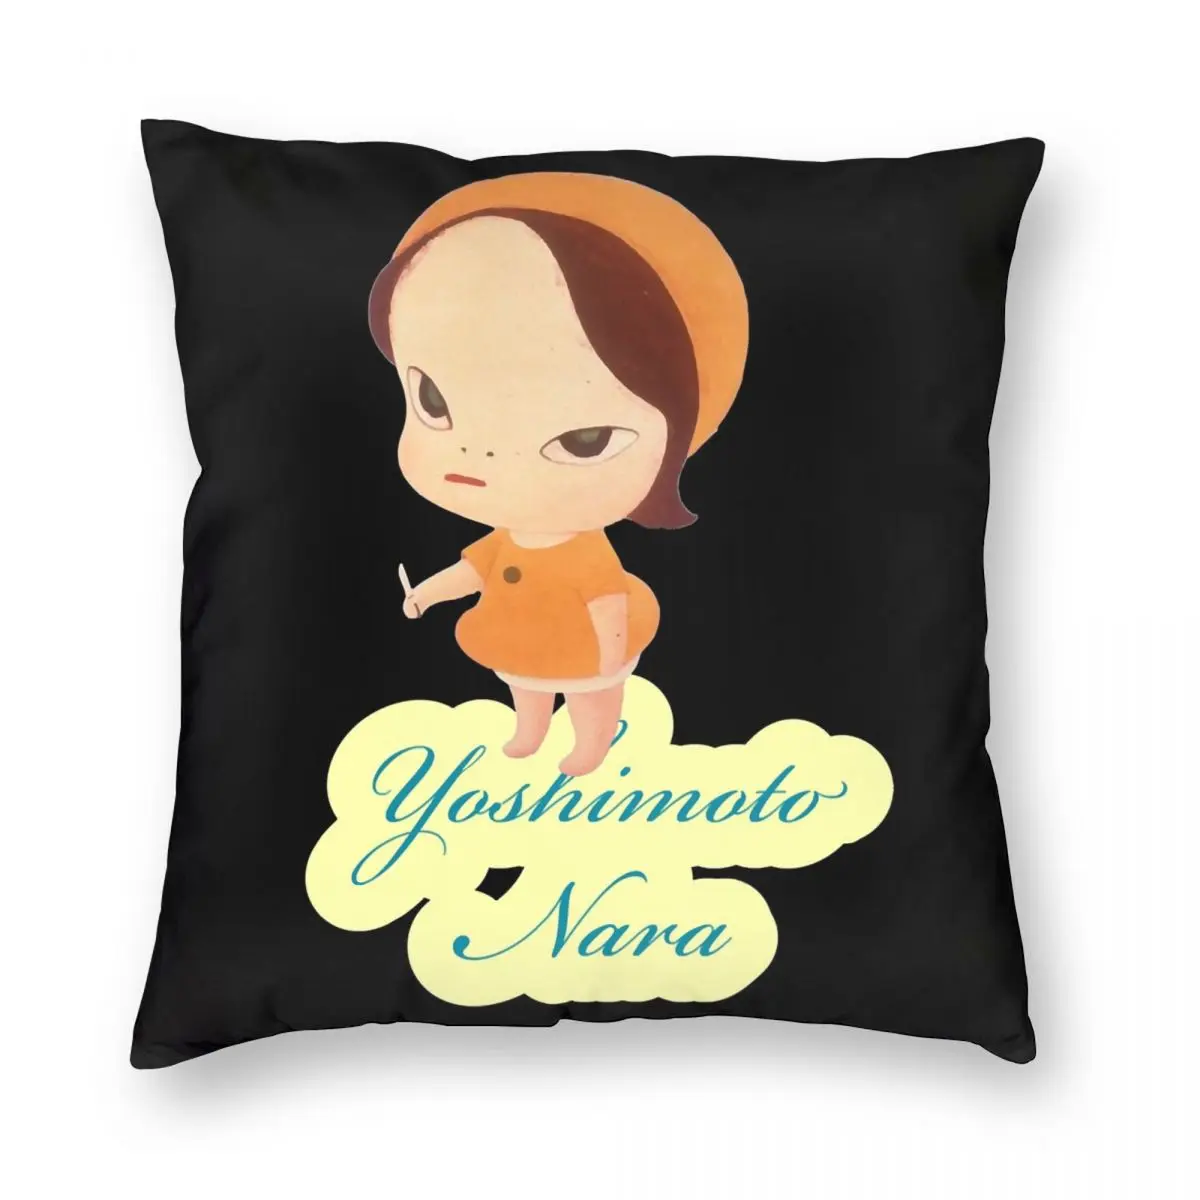 The Lazy Way To Yoshimoto Nara Really Need Pillowcase Printed Polyester Cushion Cover Decor Pillow Case Cover Home Wholesale